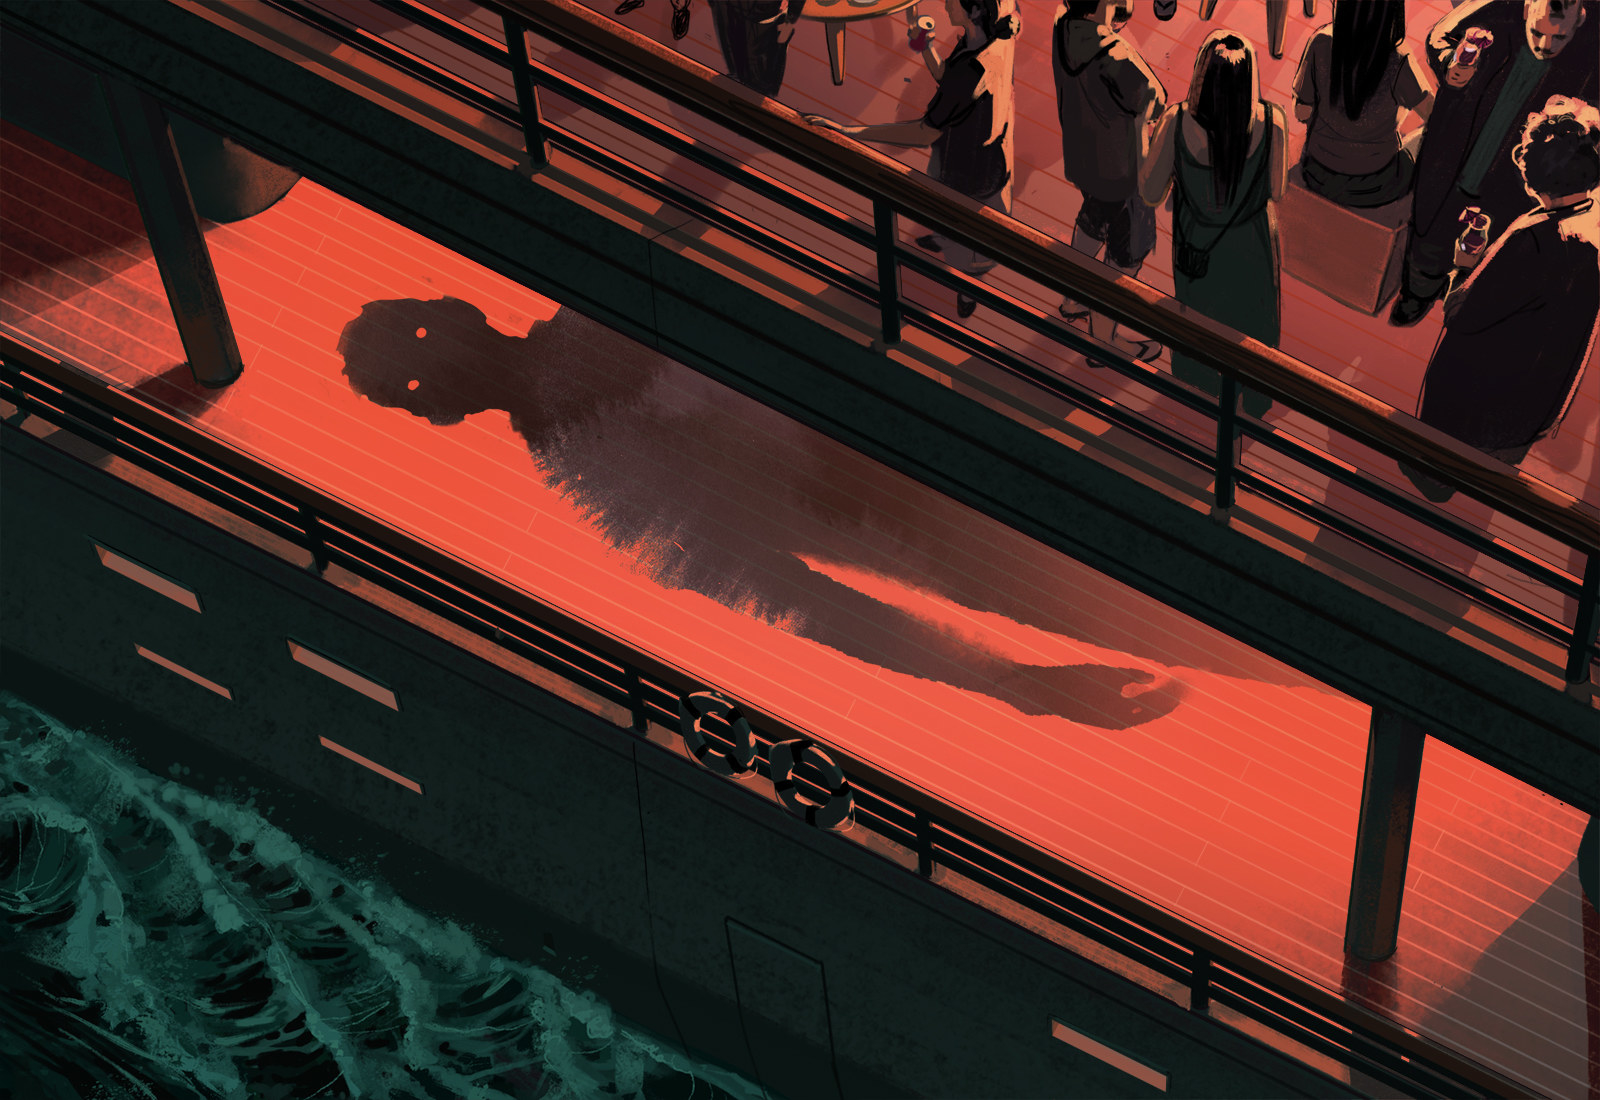 Illustration of a menacing shadow figure on a cruise ship deck